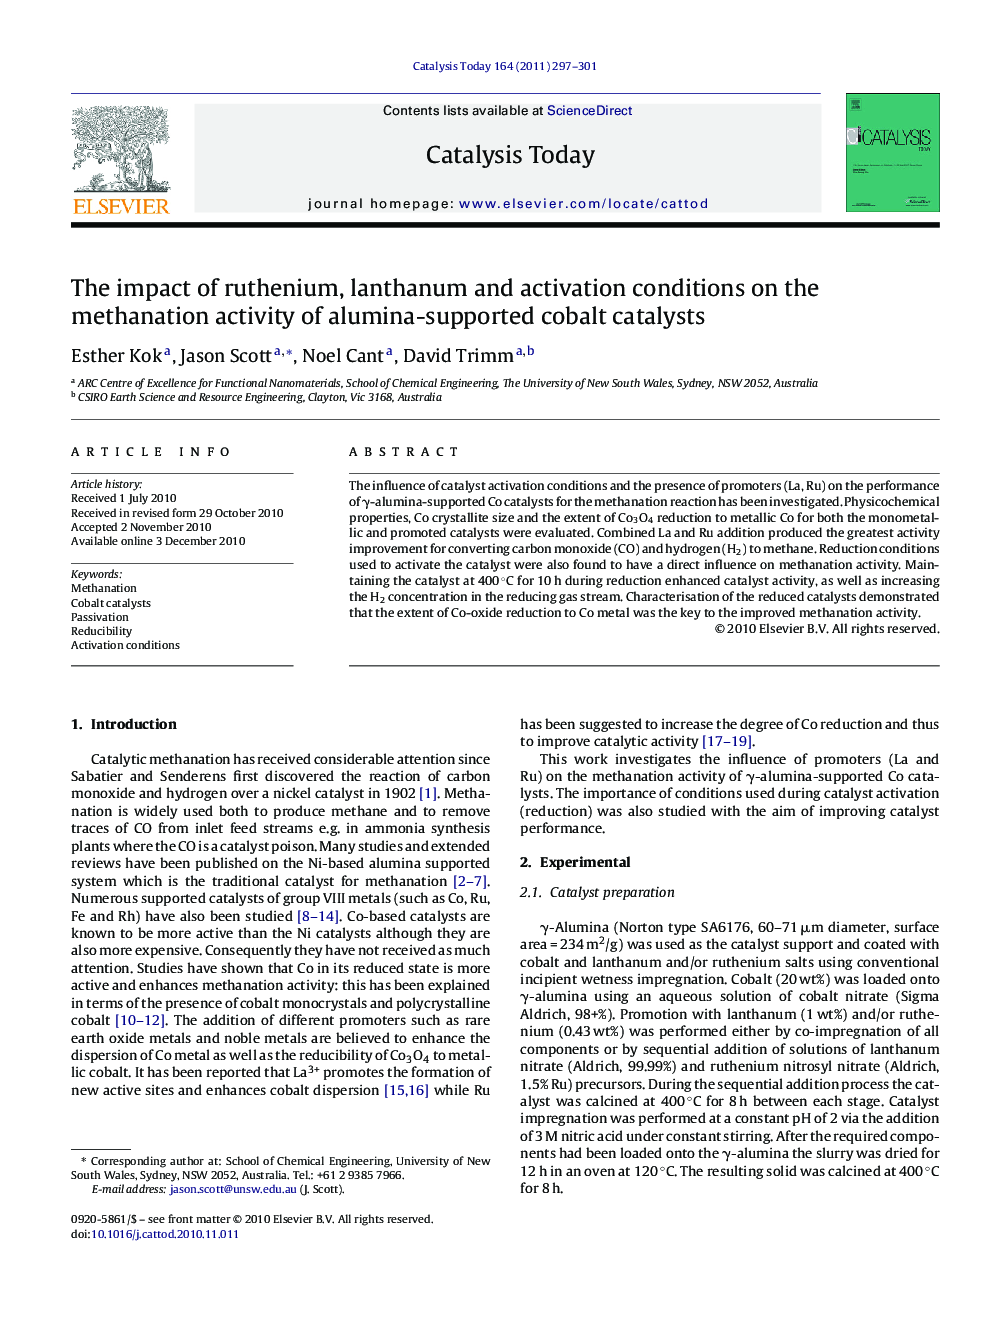 The impact of ruthenium, lanthanum and activation conditions on the methanation activity of alumina-supported cobalt catalysts